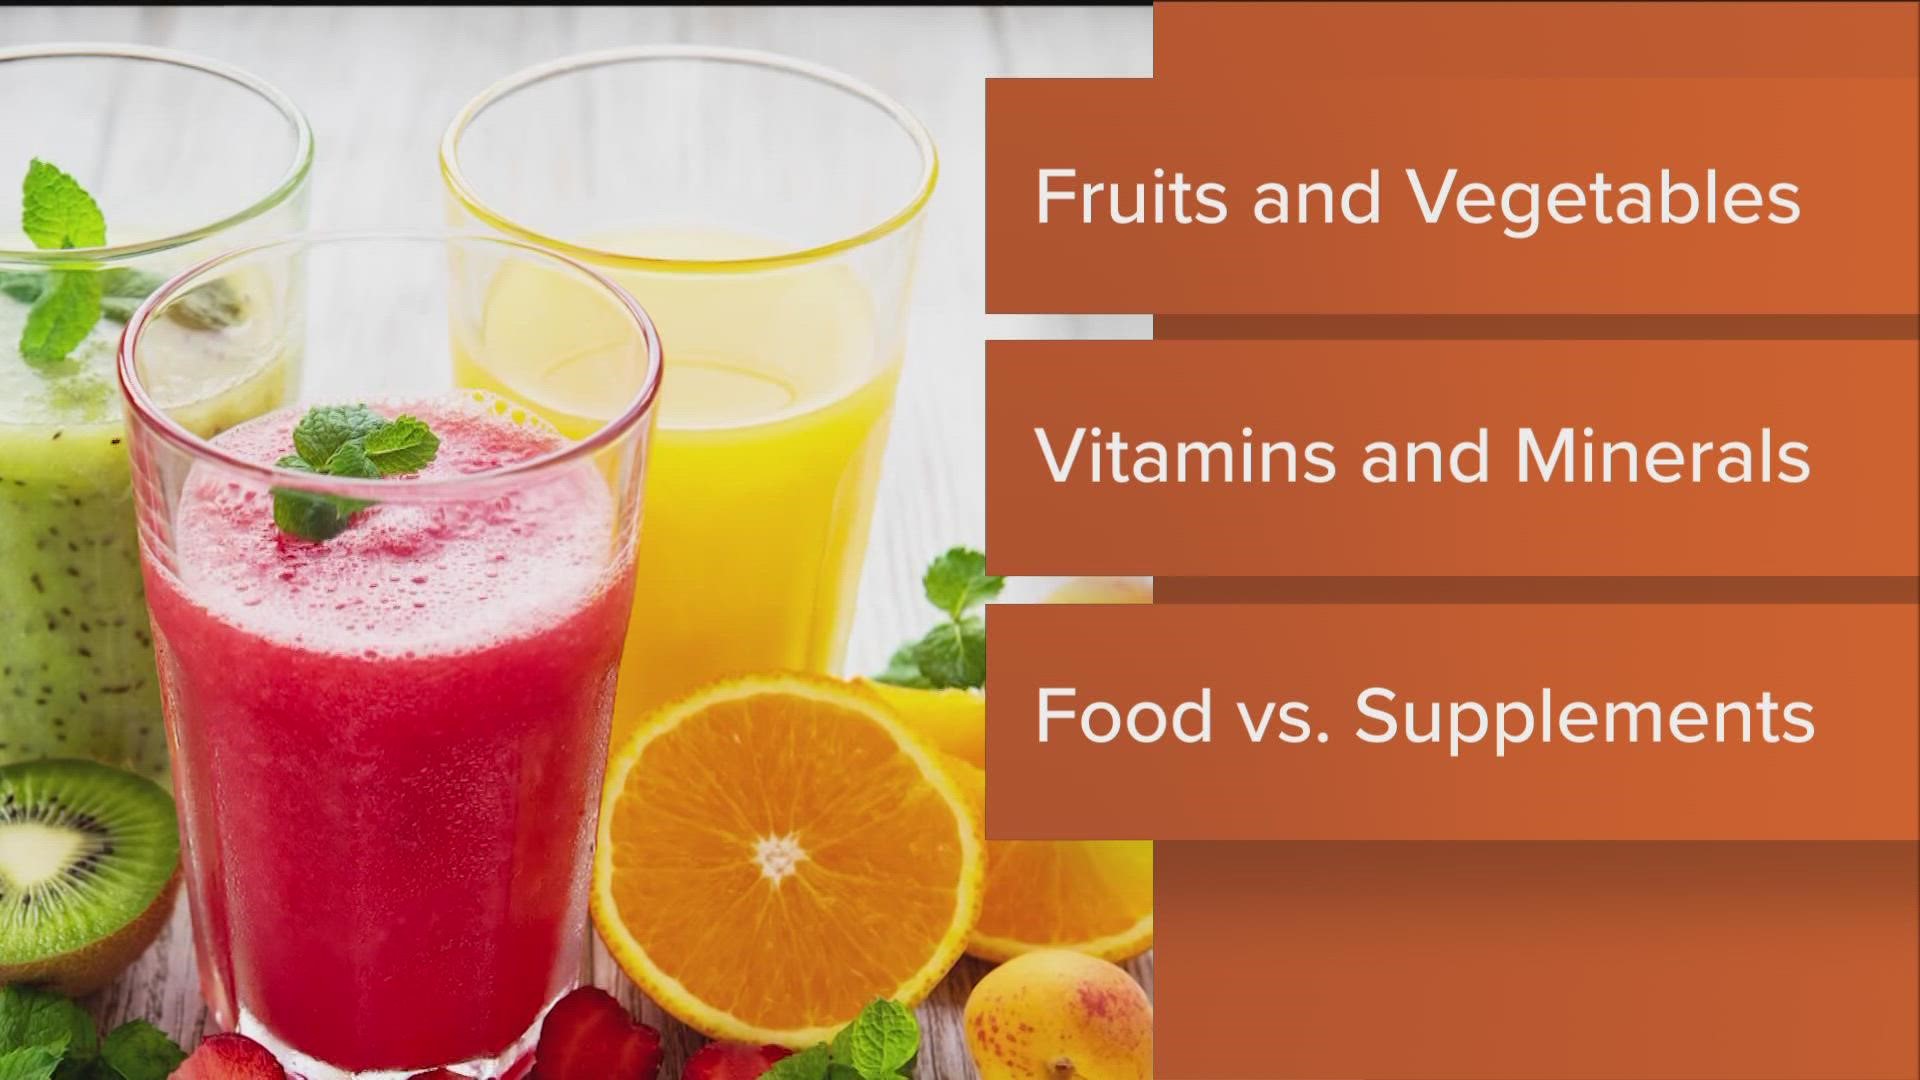 Nutrition is a major factor in keeping your immune system strong.